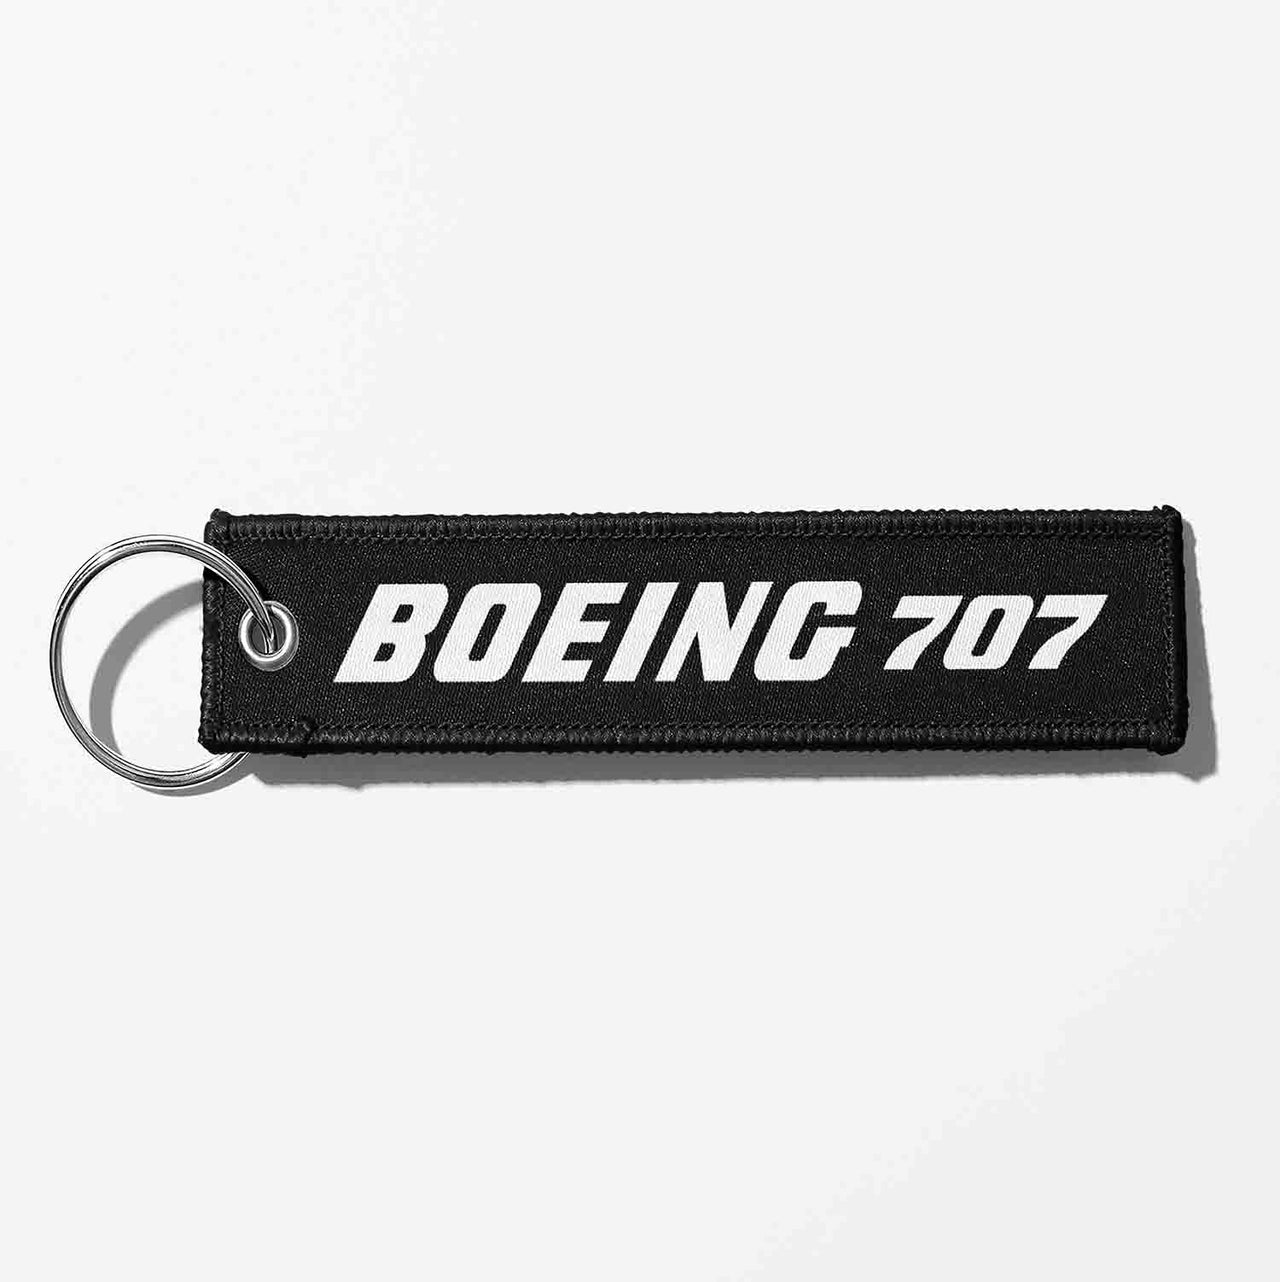 Boeing 707 & Text Designed Key Chains